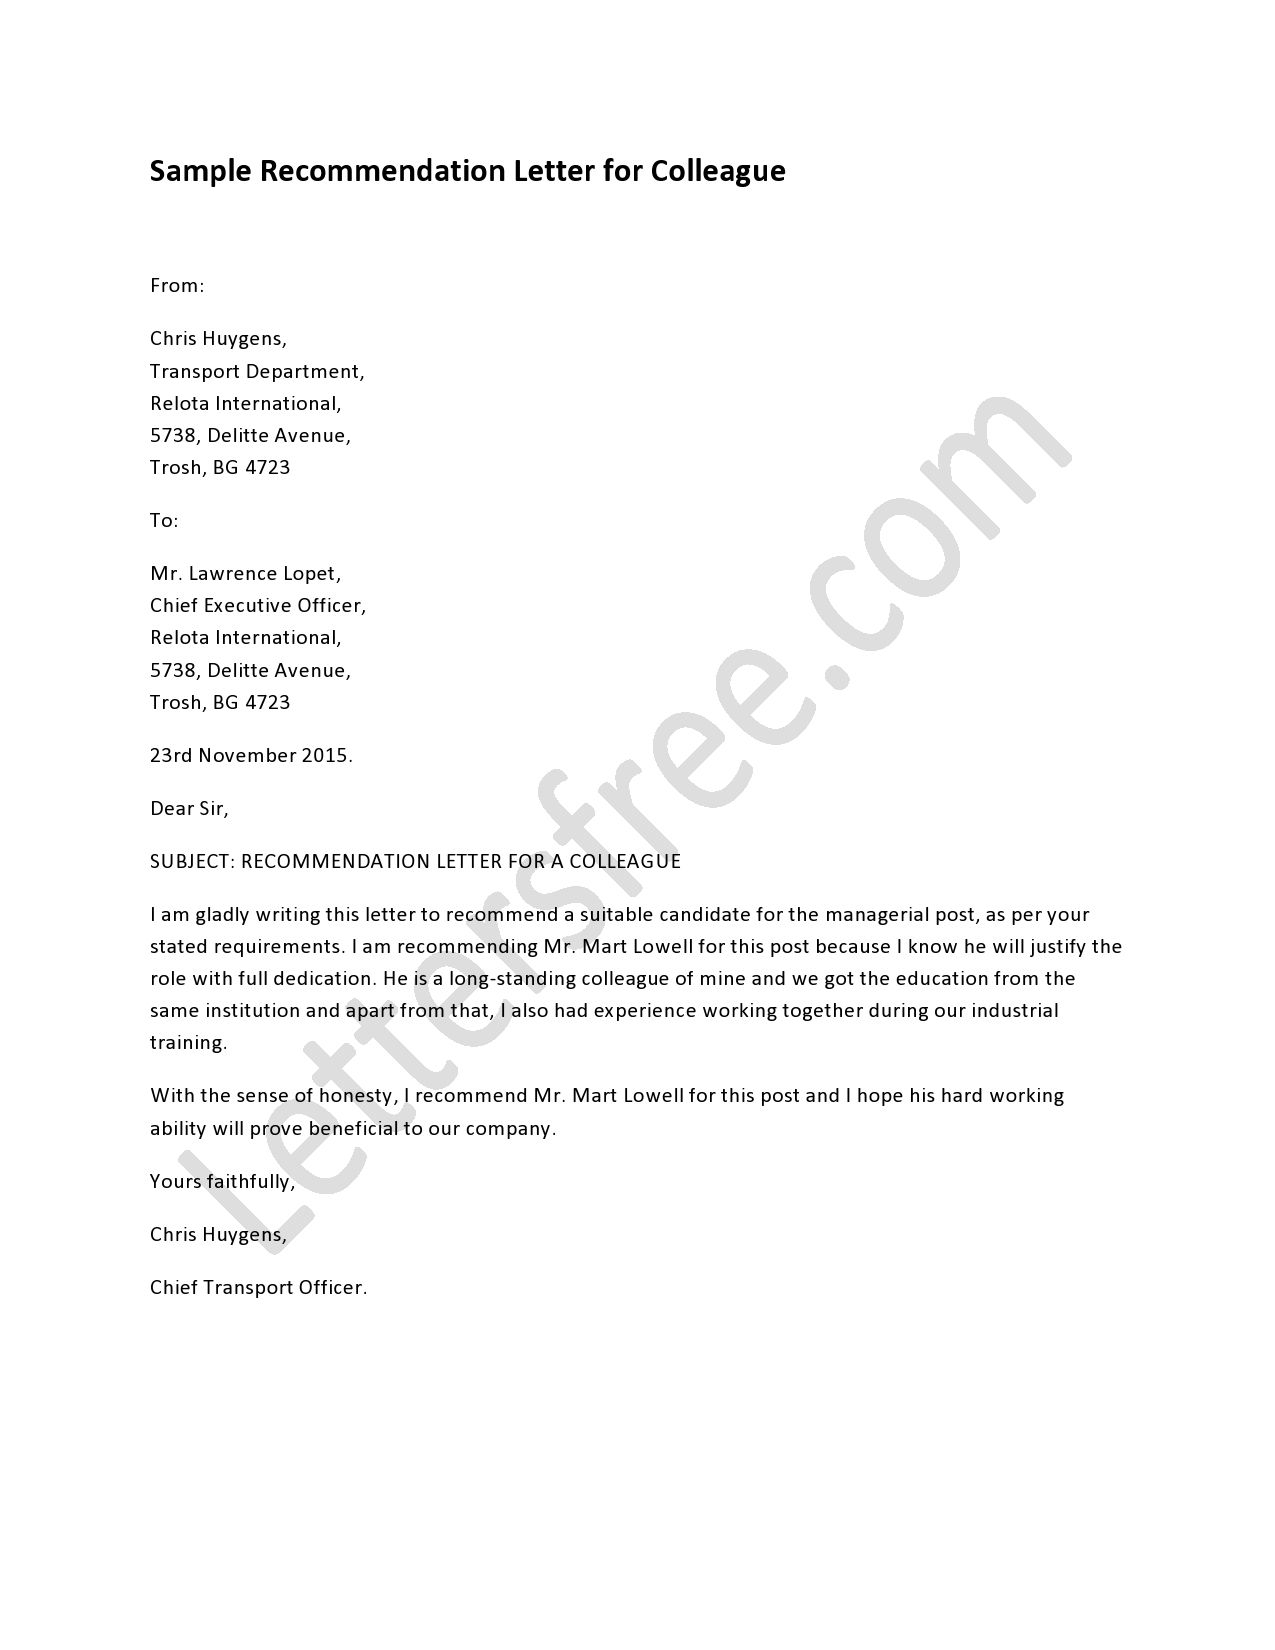 Recommendation Letter For Colleague Lettering Writing A inside dimensions 1275 X 1650